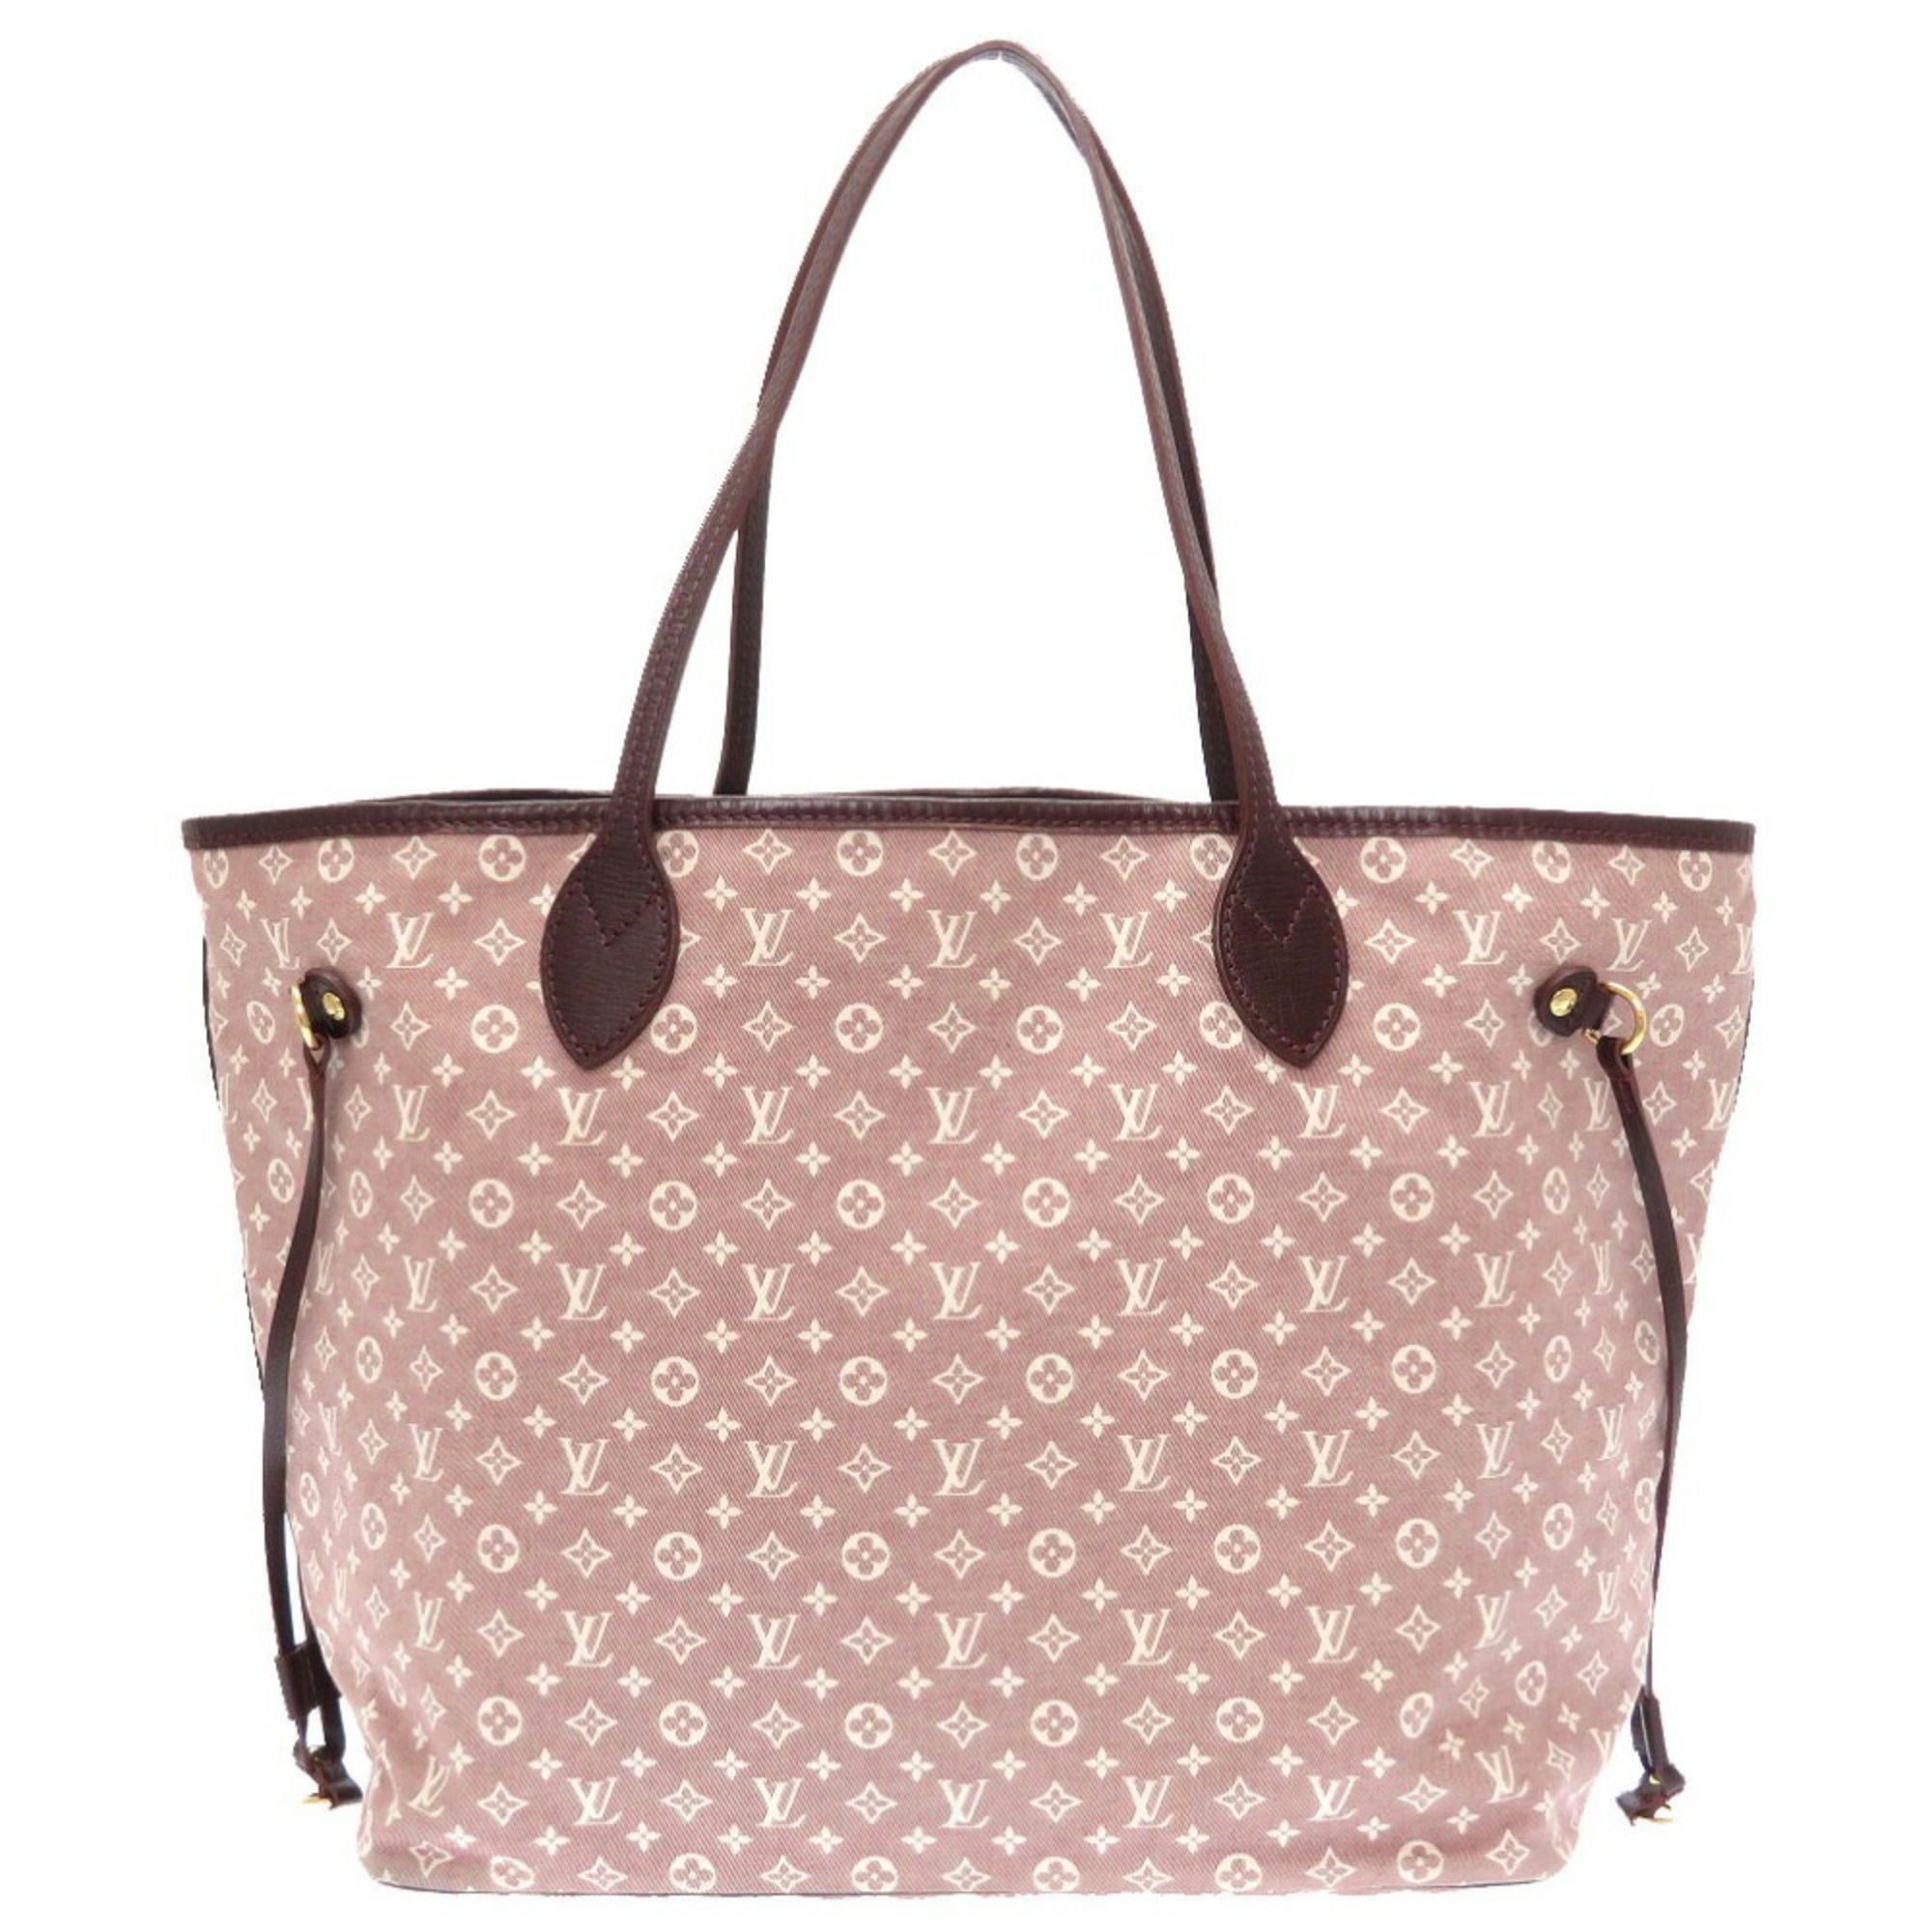 Louis+Vuitton+Neverfull+Tote+MM+Pink+Leather for sale online